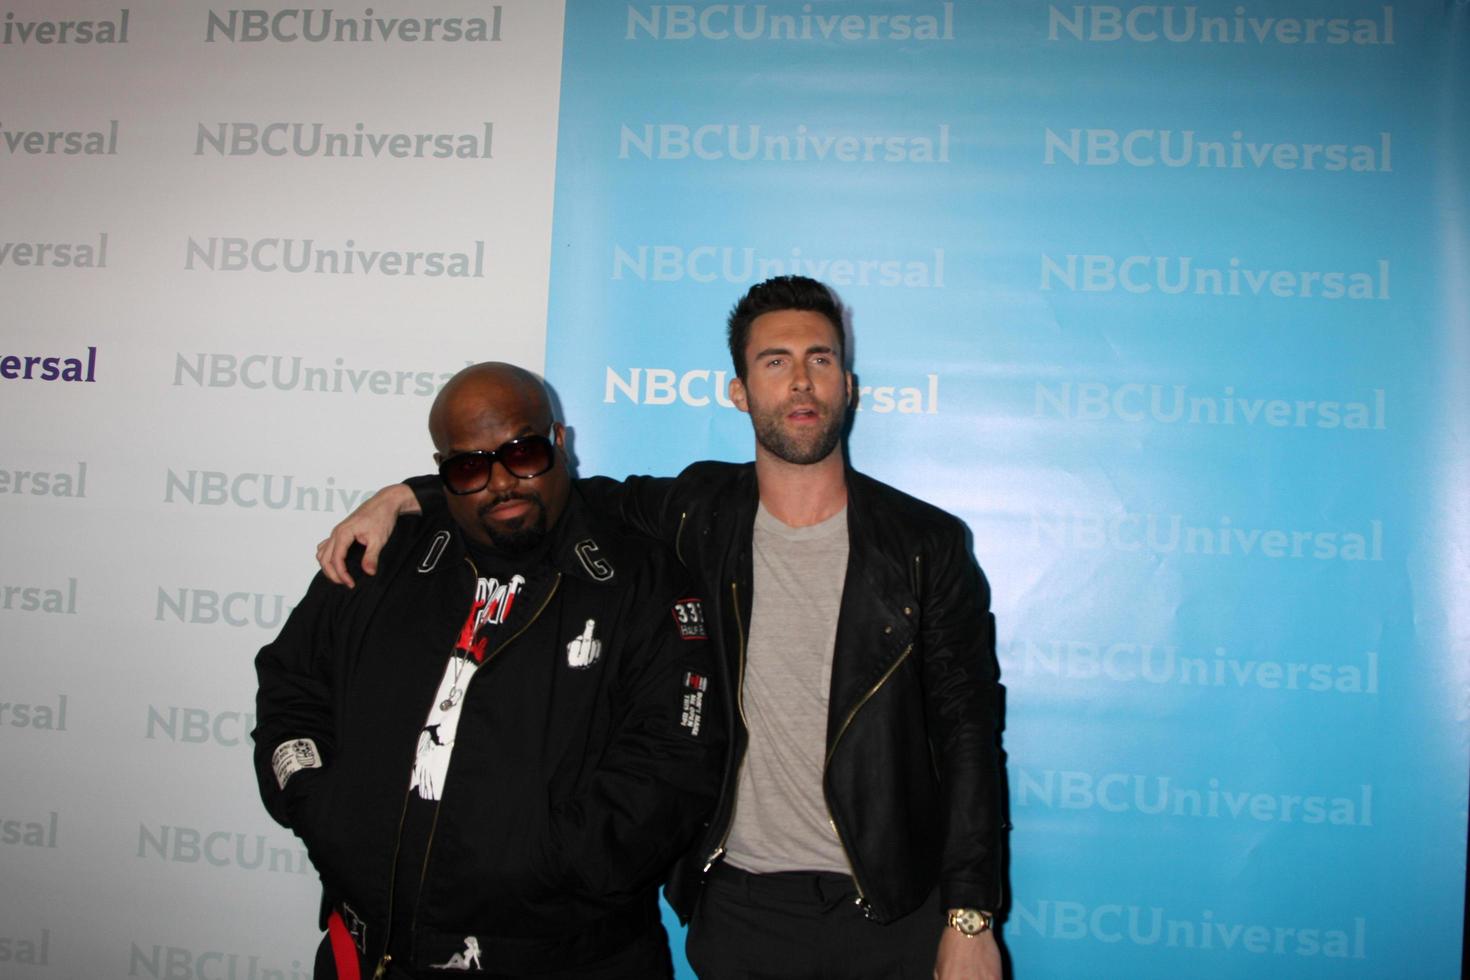 LOS ANGELES, JAN 6 - CeeLo Green, Adam Levine arrives at the NBC Universal All-Star Winter TCA Party at The Athenauem on January 6, 2012 in Pasadena, CA photo